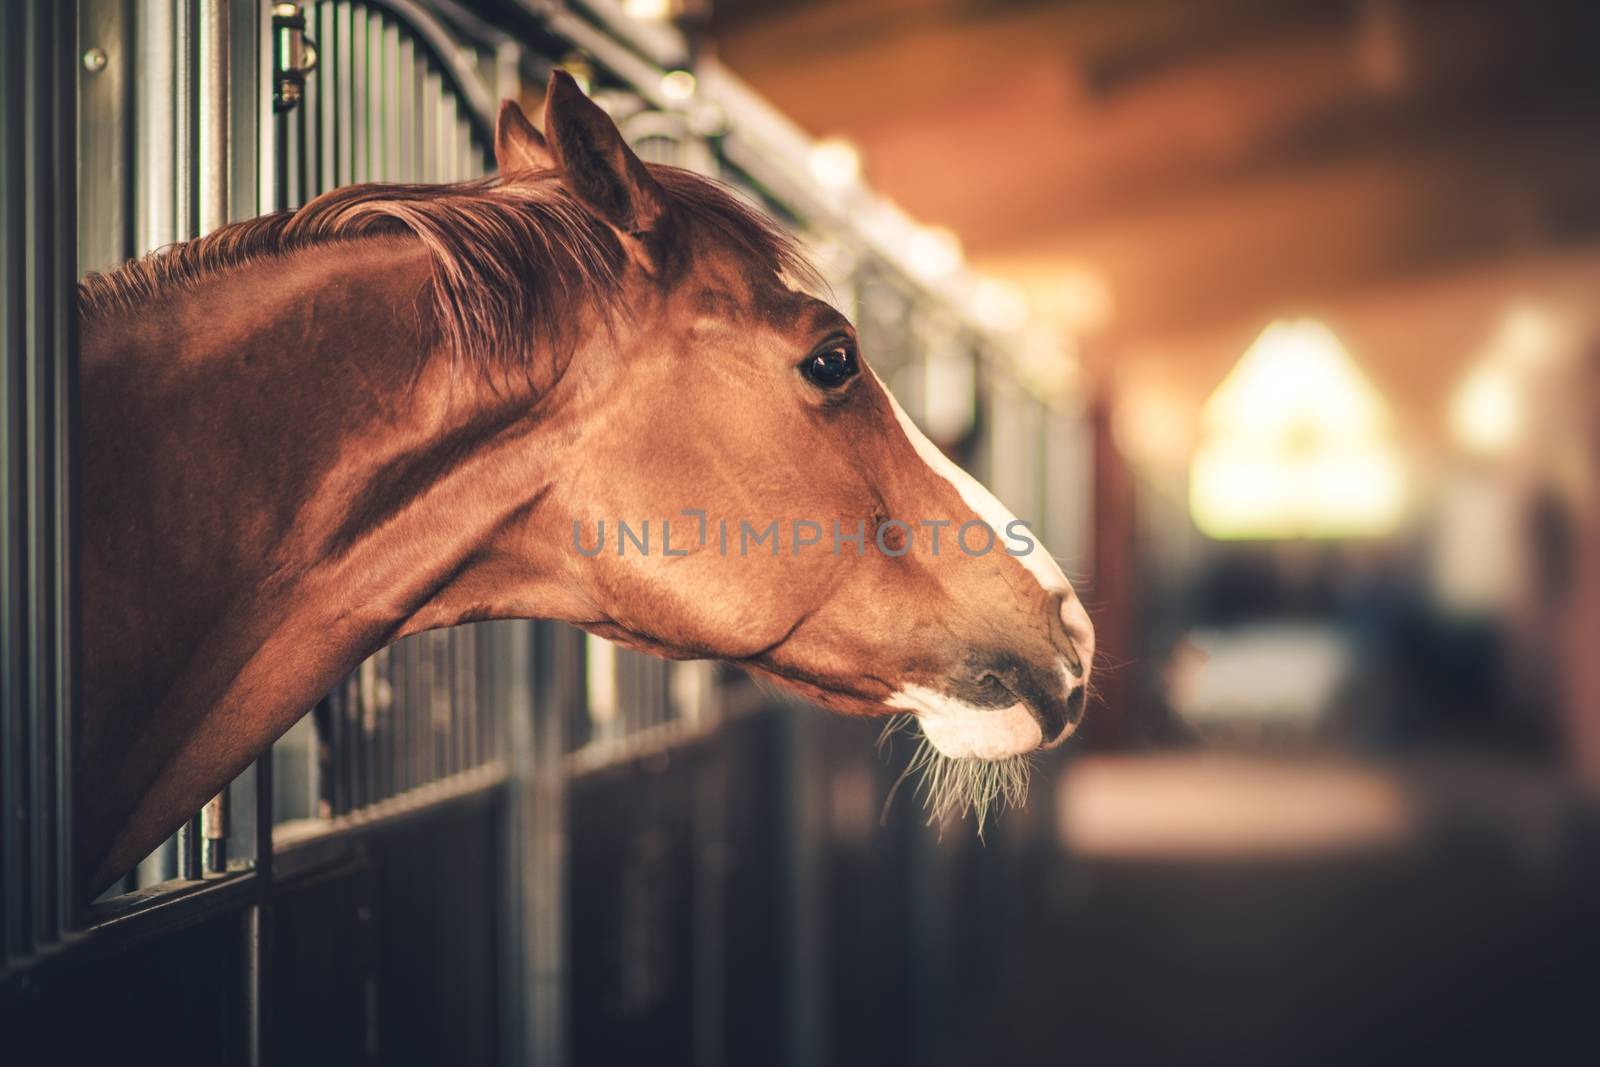 Equestrian Facility.. Mature Horse in a Stable Looking Outside of His Box. 